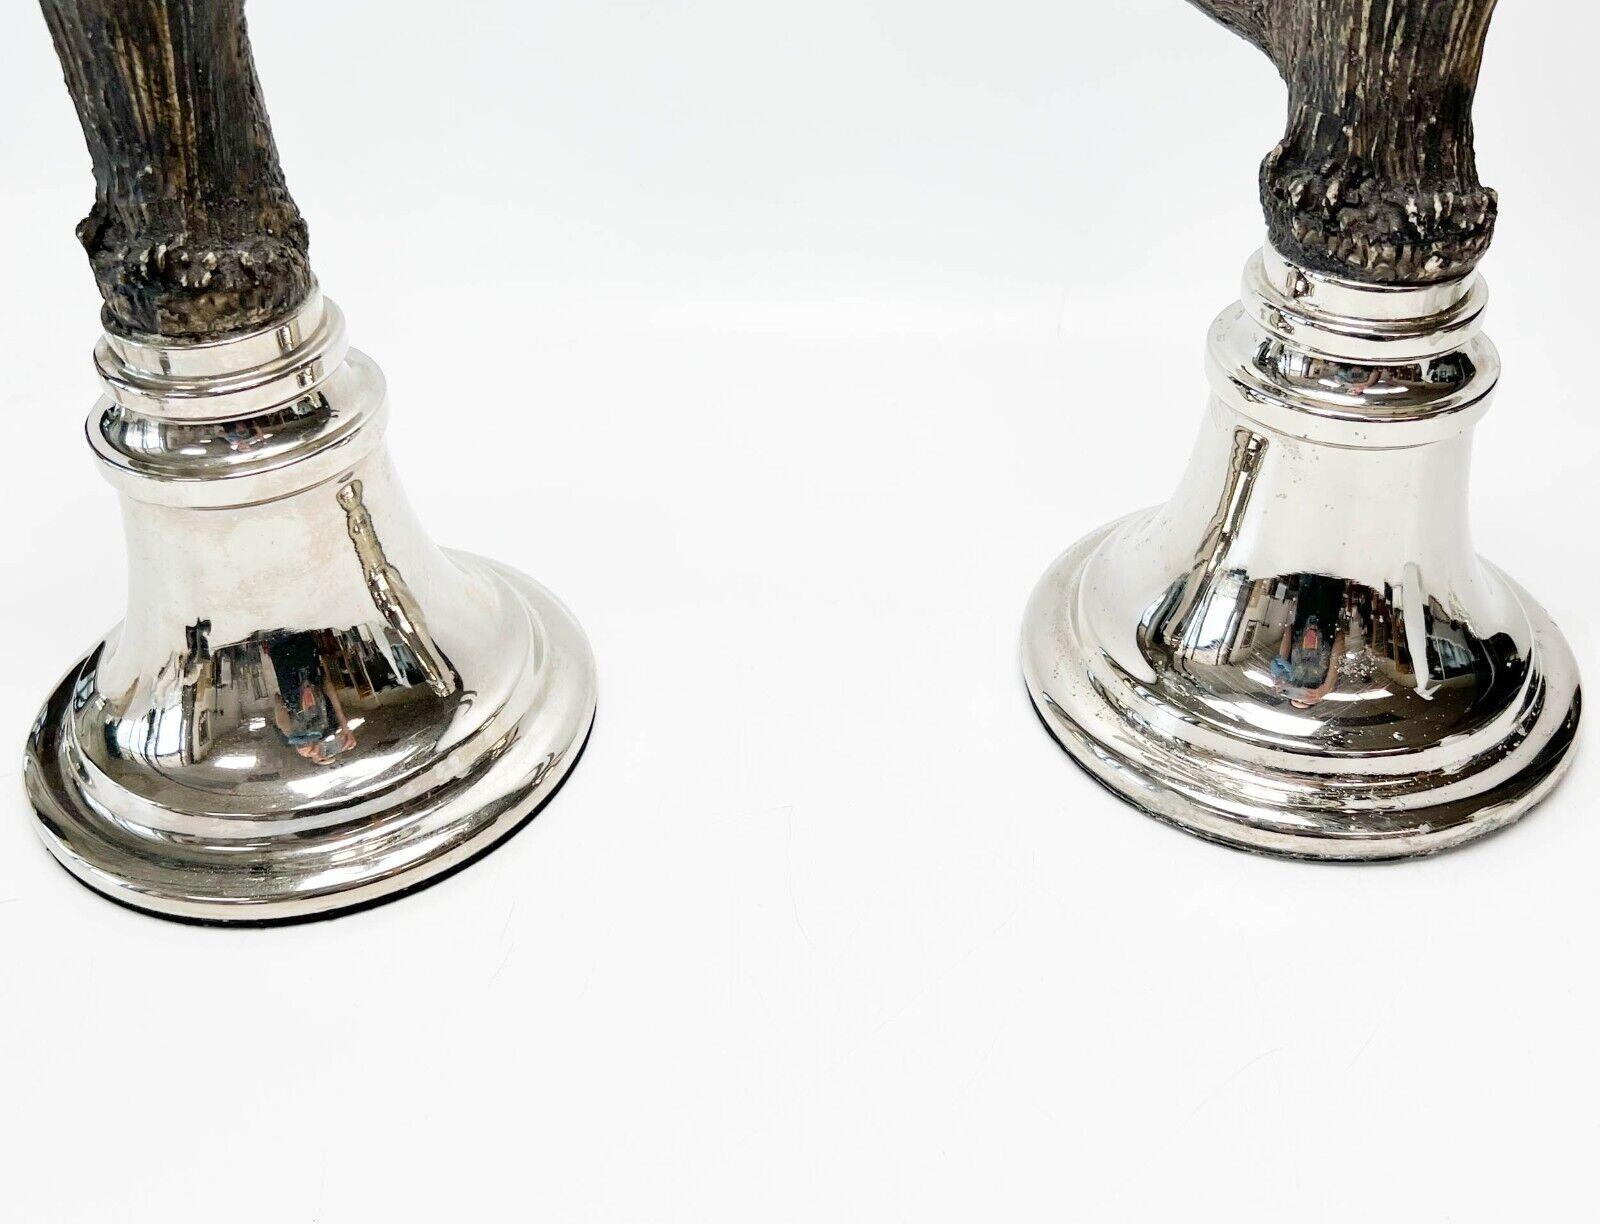  Pair Mid Century Simulated Horn & Silver Plate Candelabras In Fair Condition For Sale In Gardena, CA